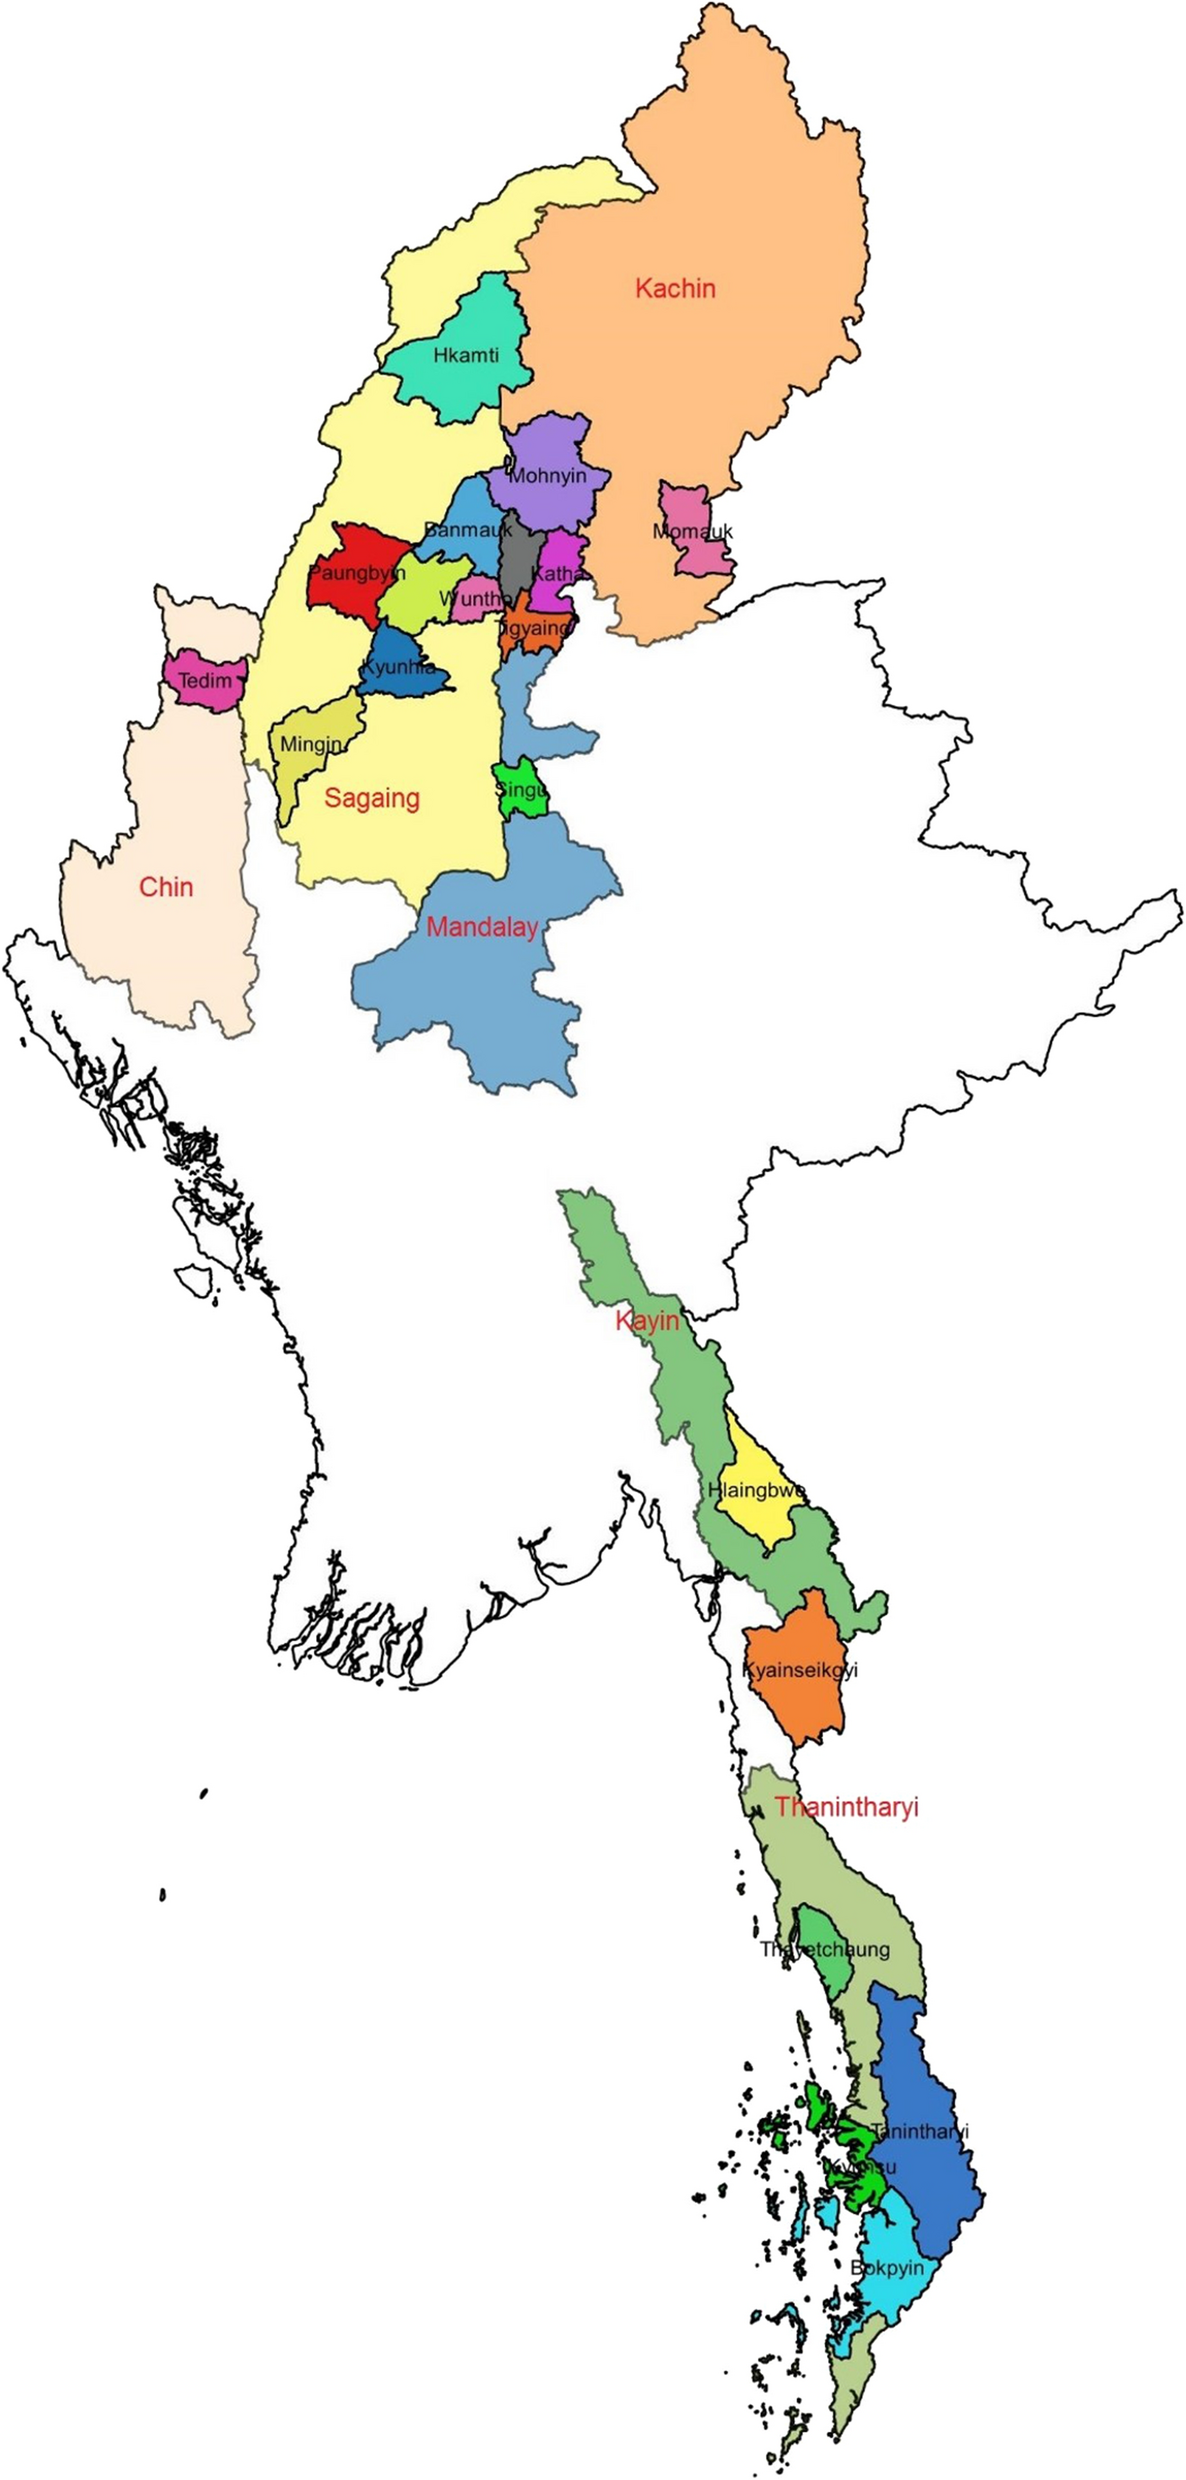 Fig. 2. Map showing 20 study townships in 6 states and regions of Myanmar